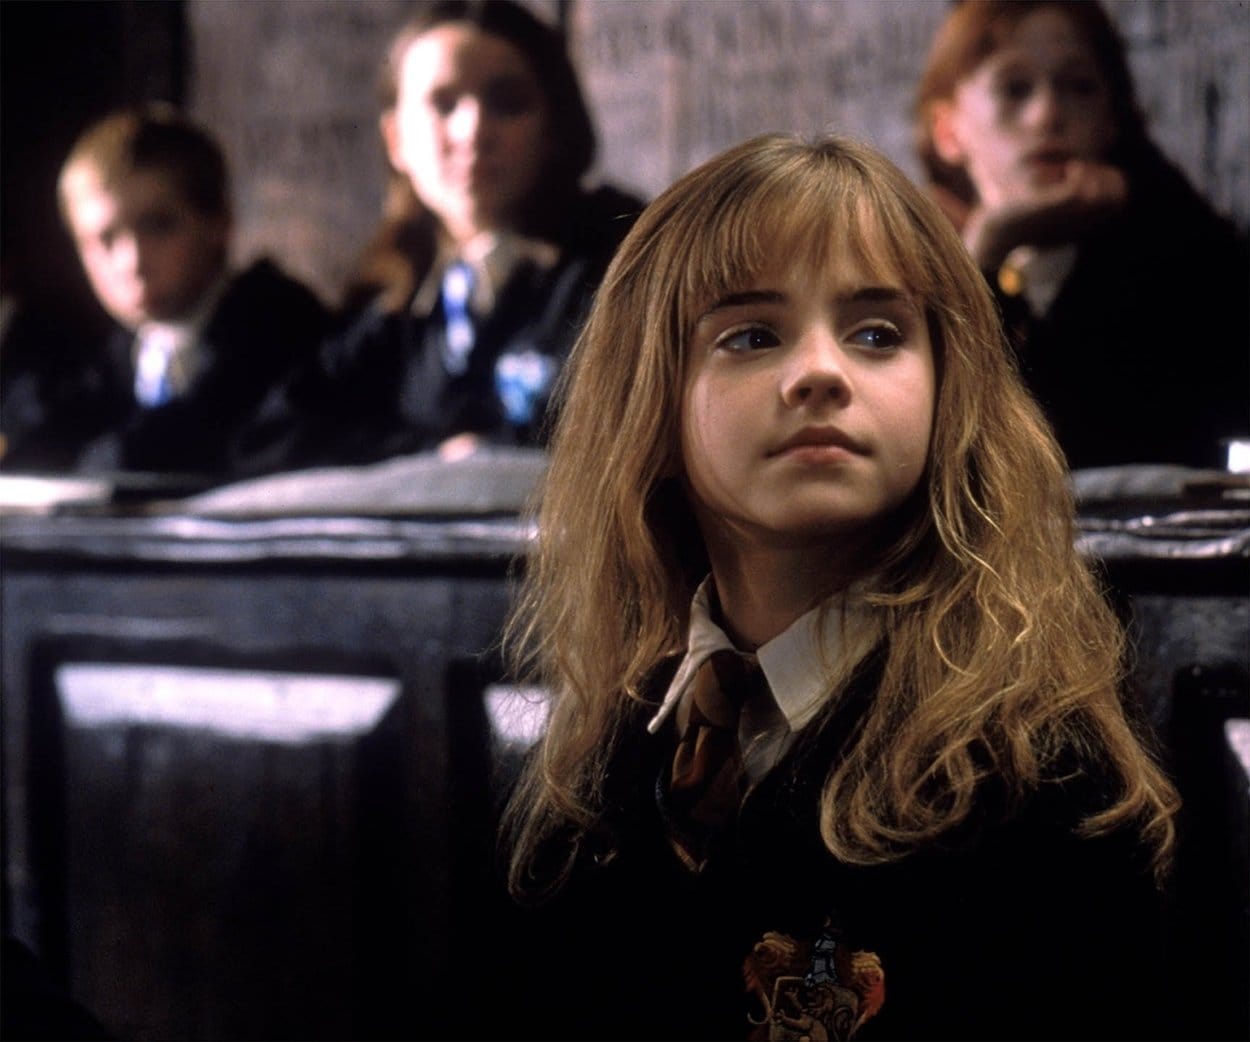 Emma Watson was 11 years old when Harry Potter and the Philosopher’s Stone was released in November 2001